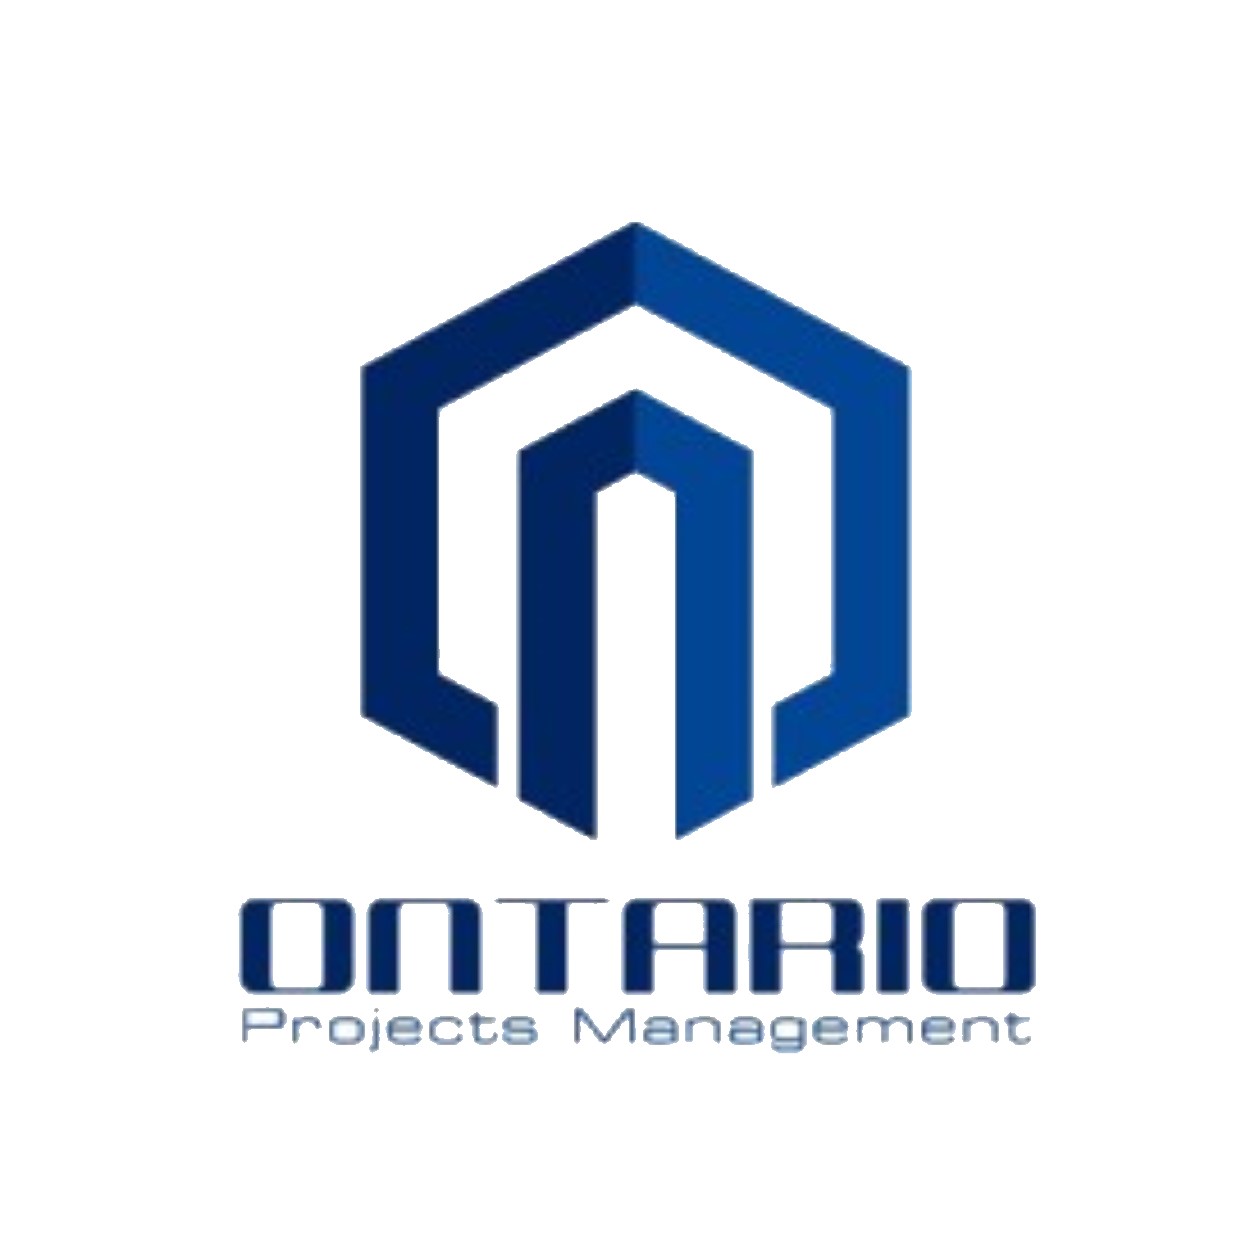 Ontario for Project Management